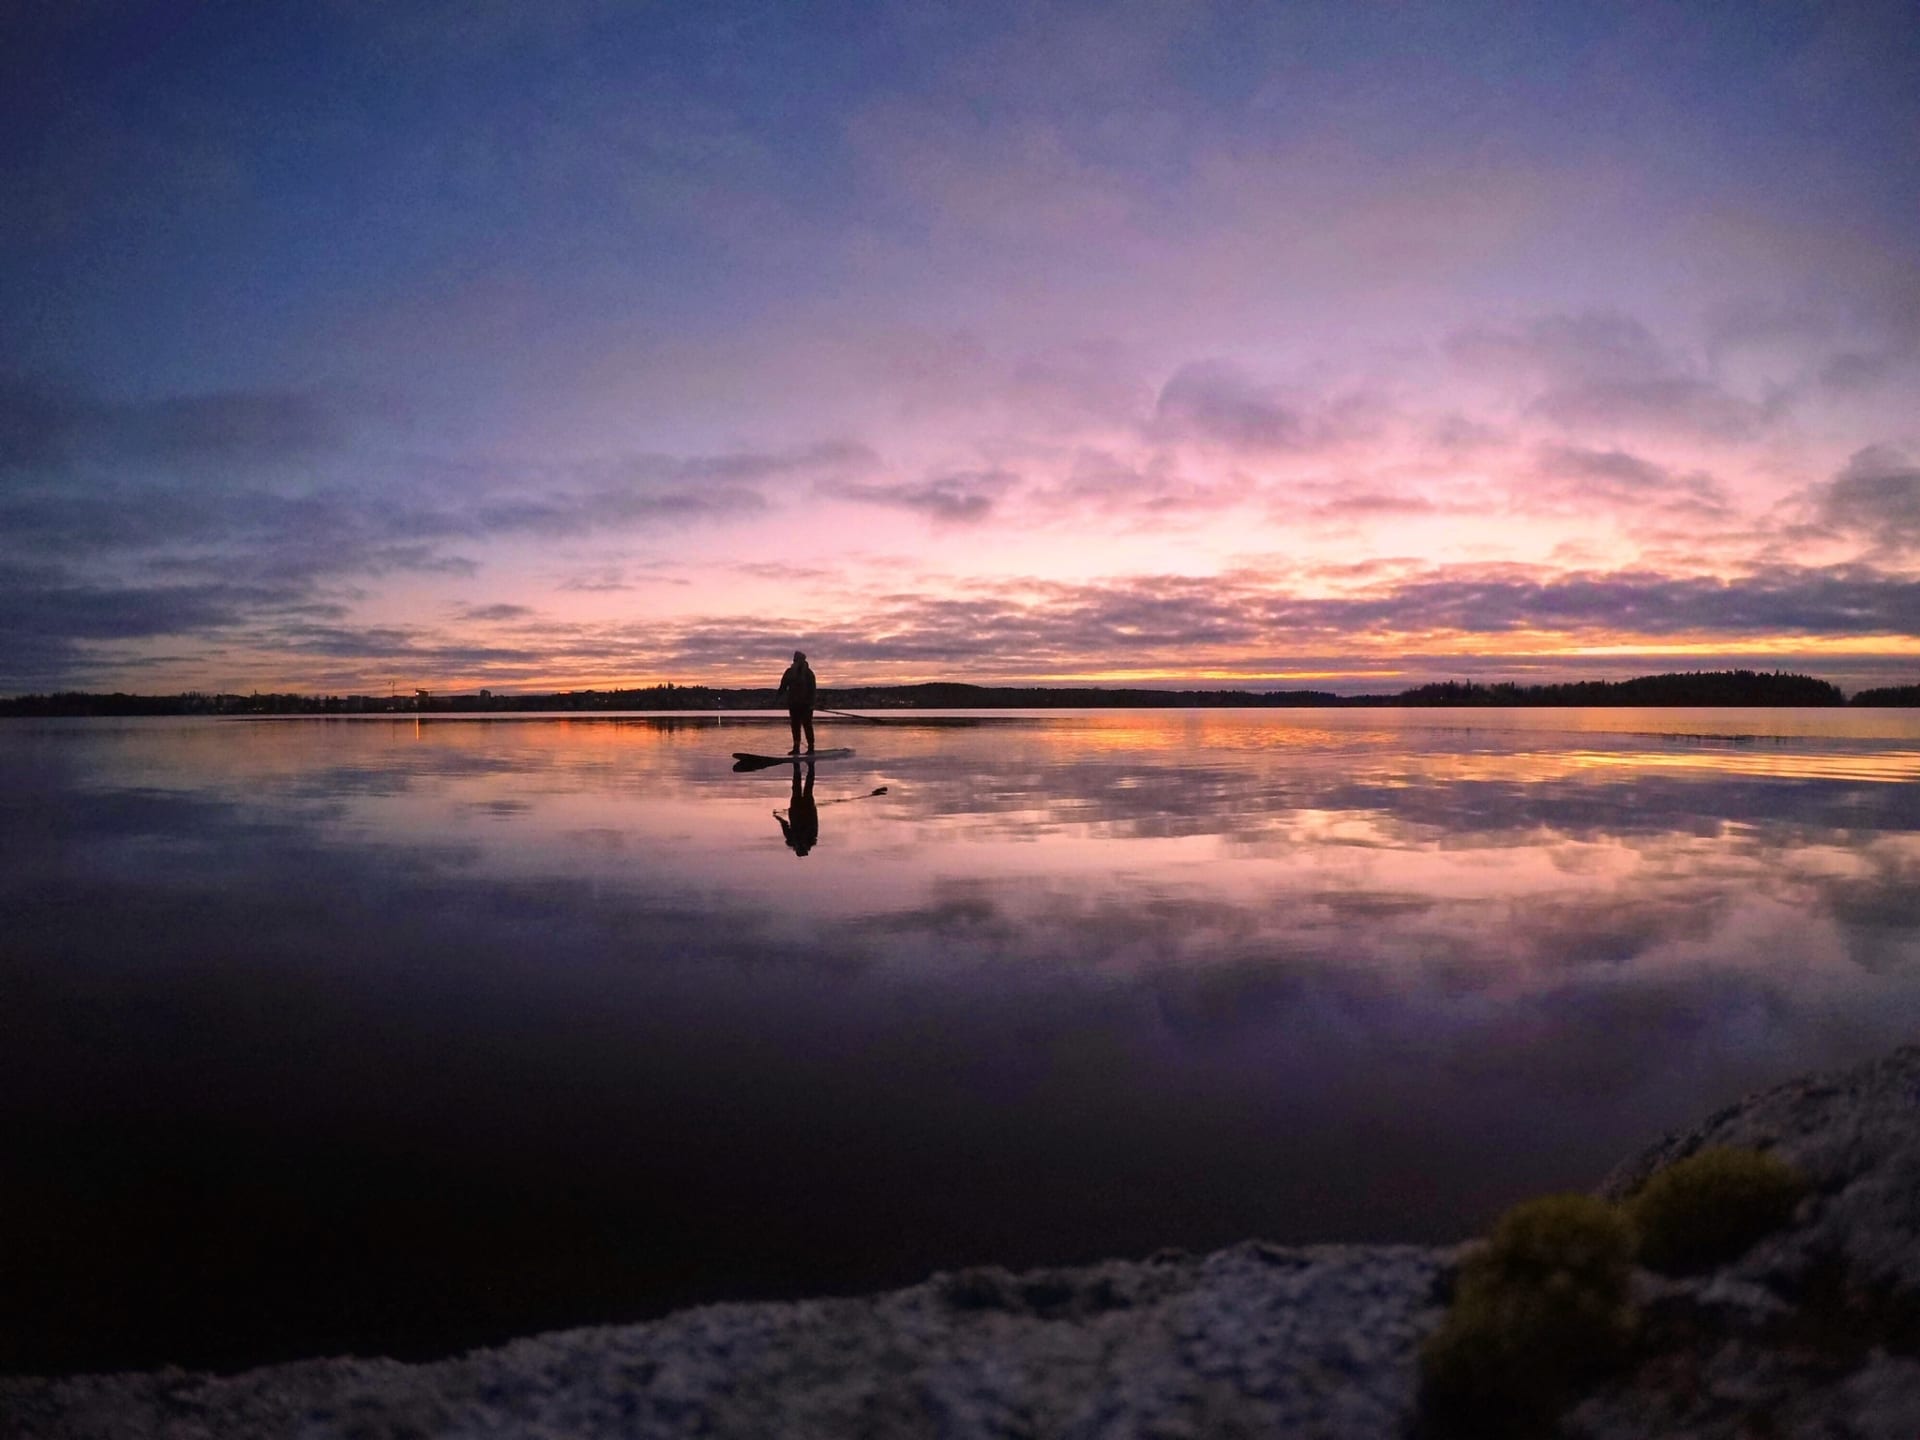 One person is stand up paddling in colorful sunset scenery on lake Pyhäjärvi.